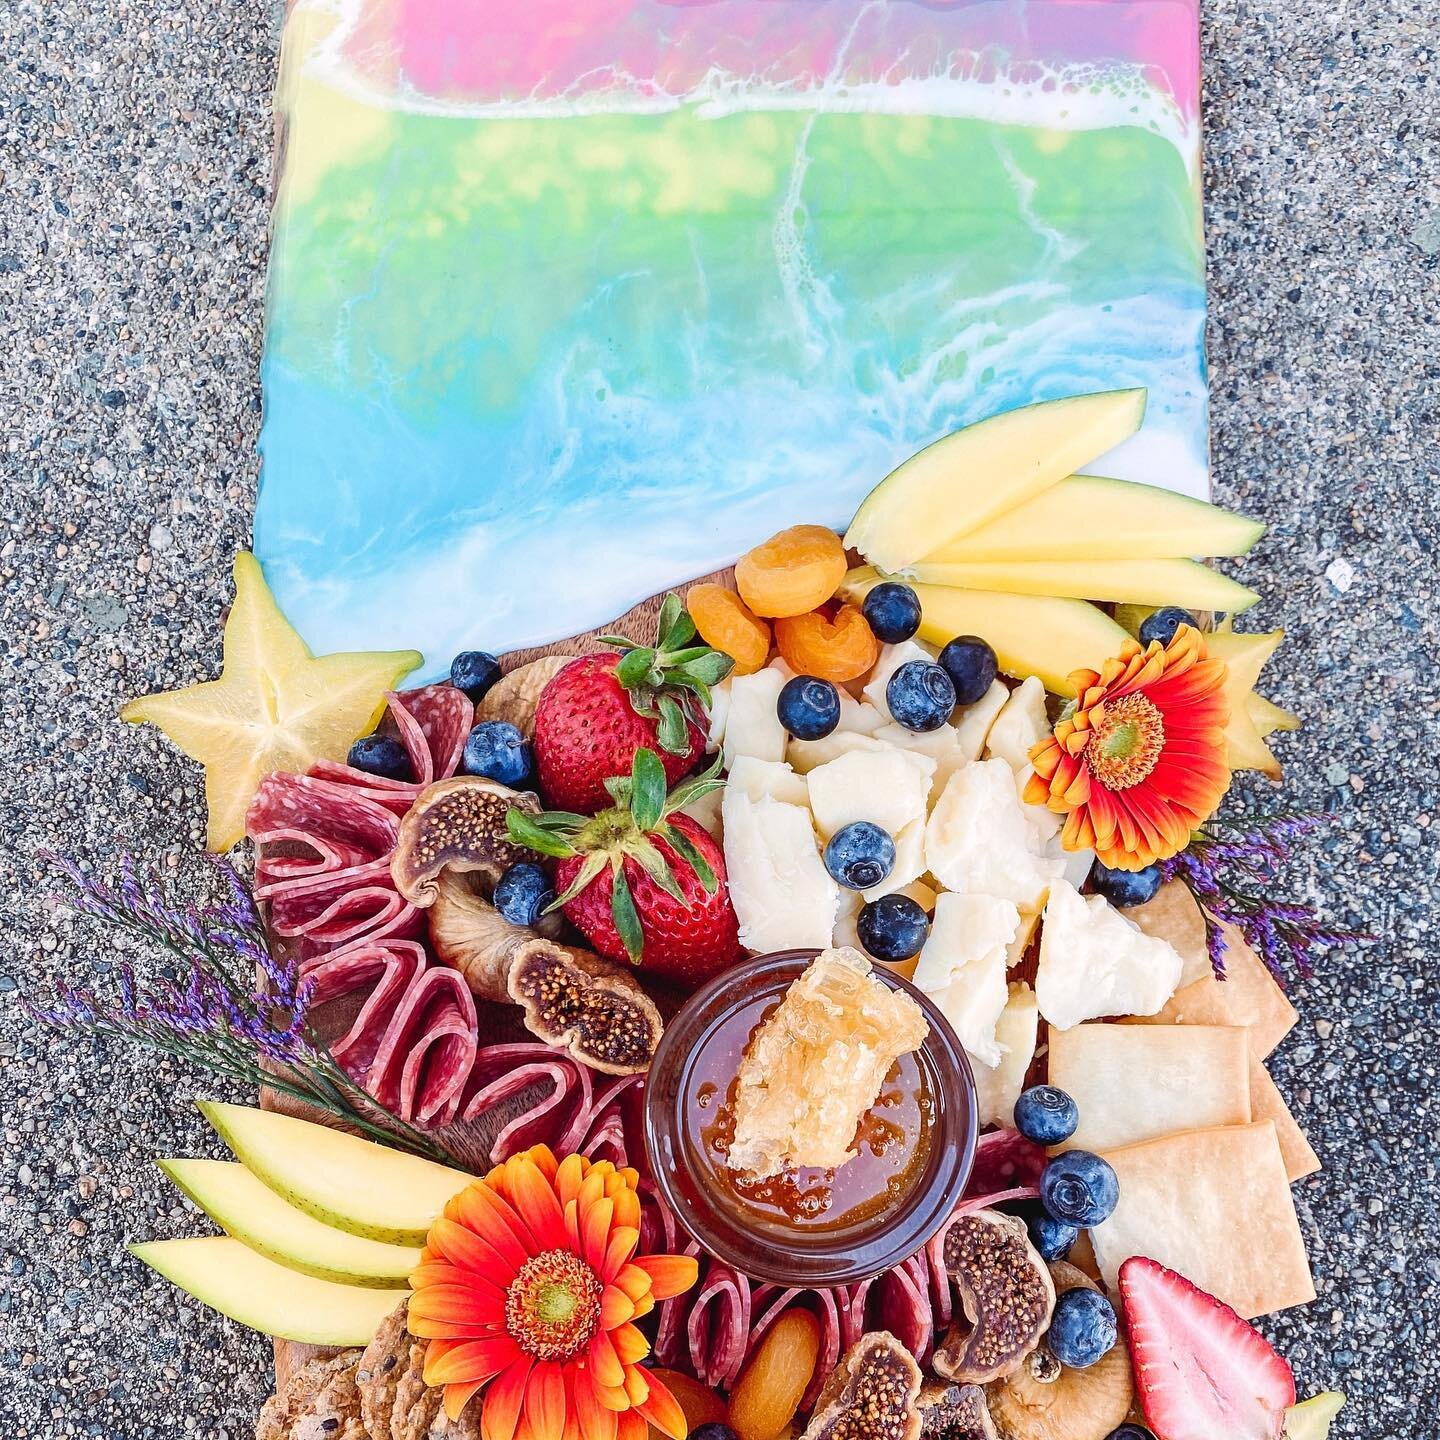 Edible summer ☀️ order your very own @krushincolor resin board &amp; cheese display for your next&hellip;anything! www.rindandrennet.com